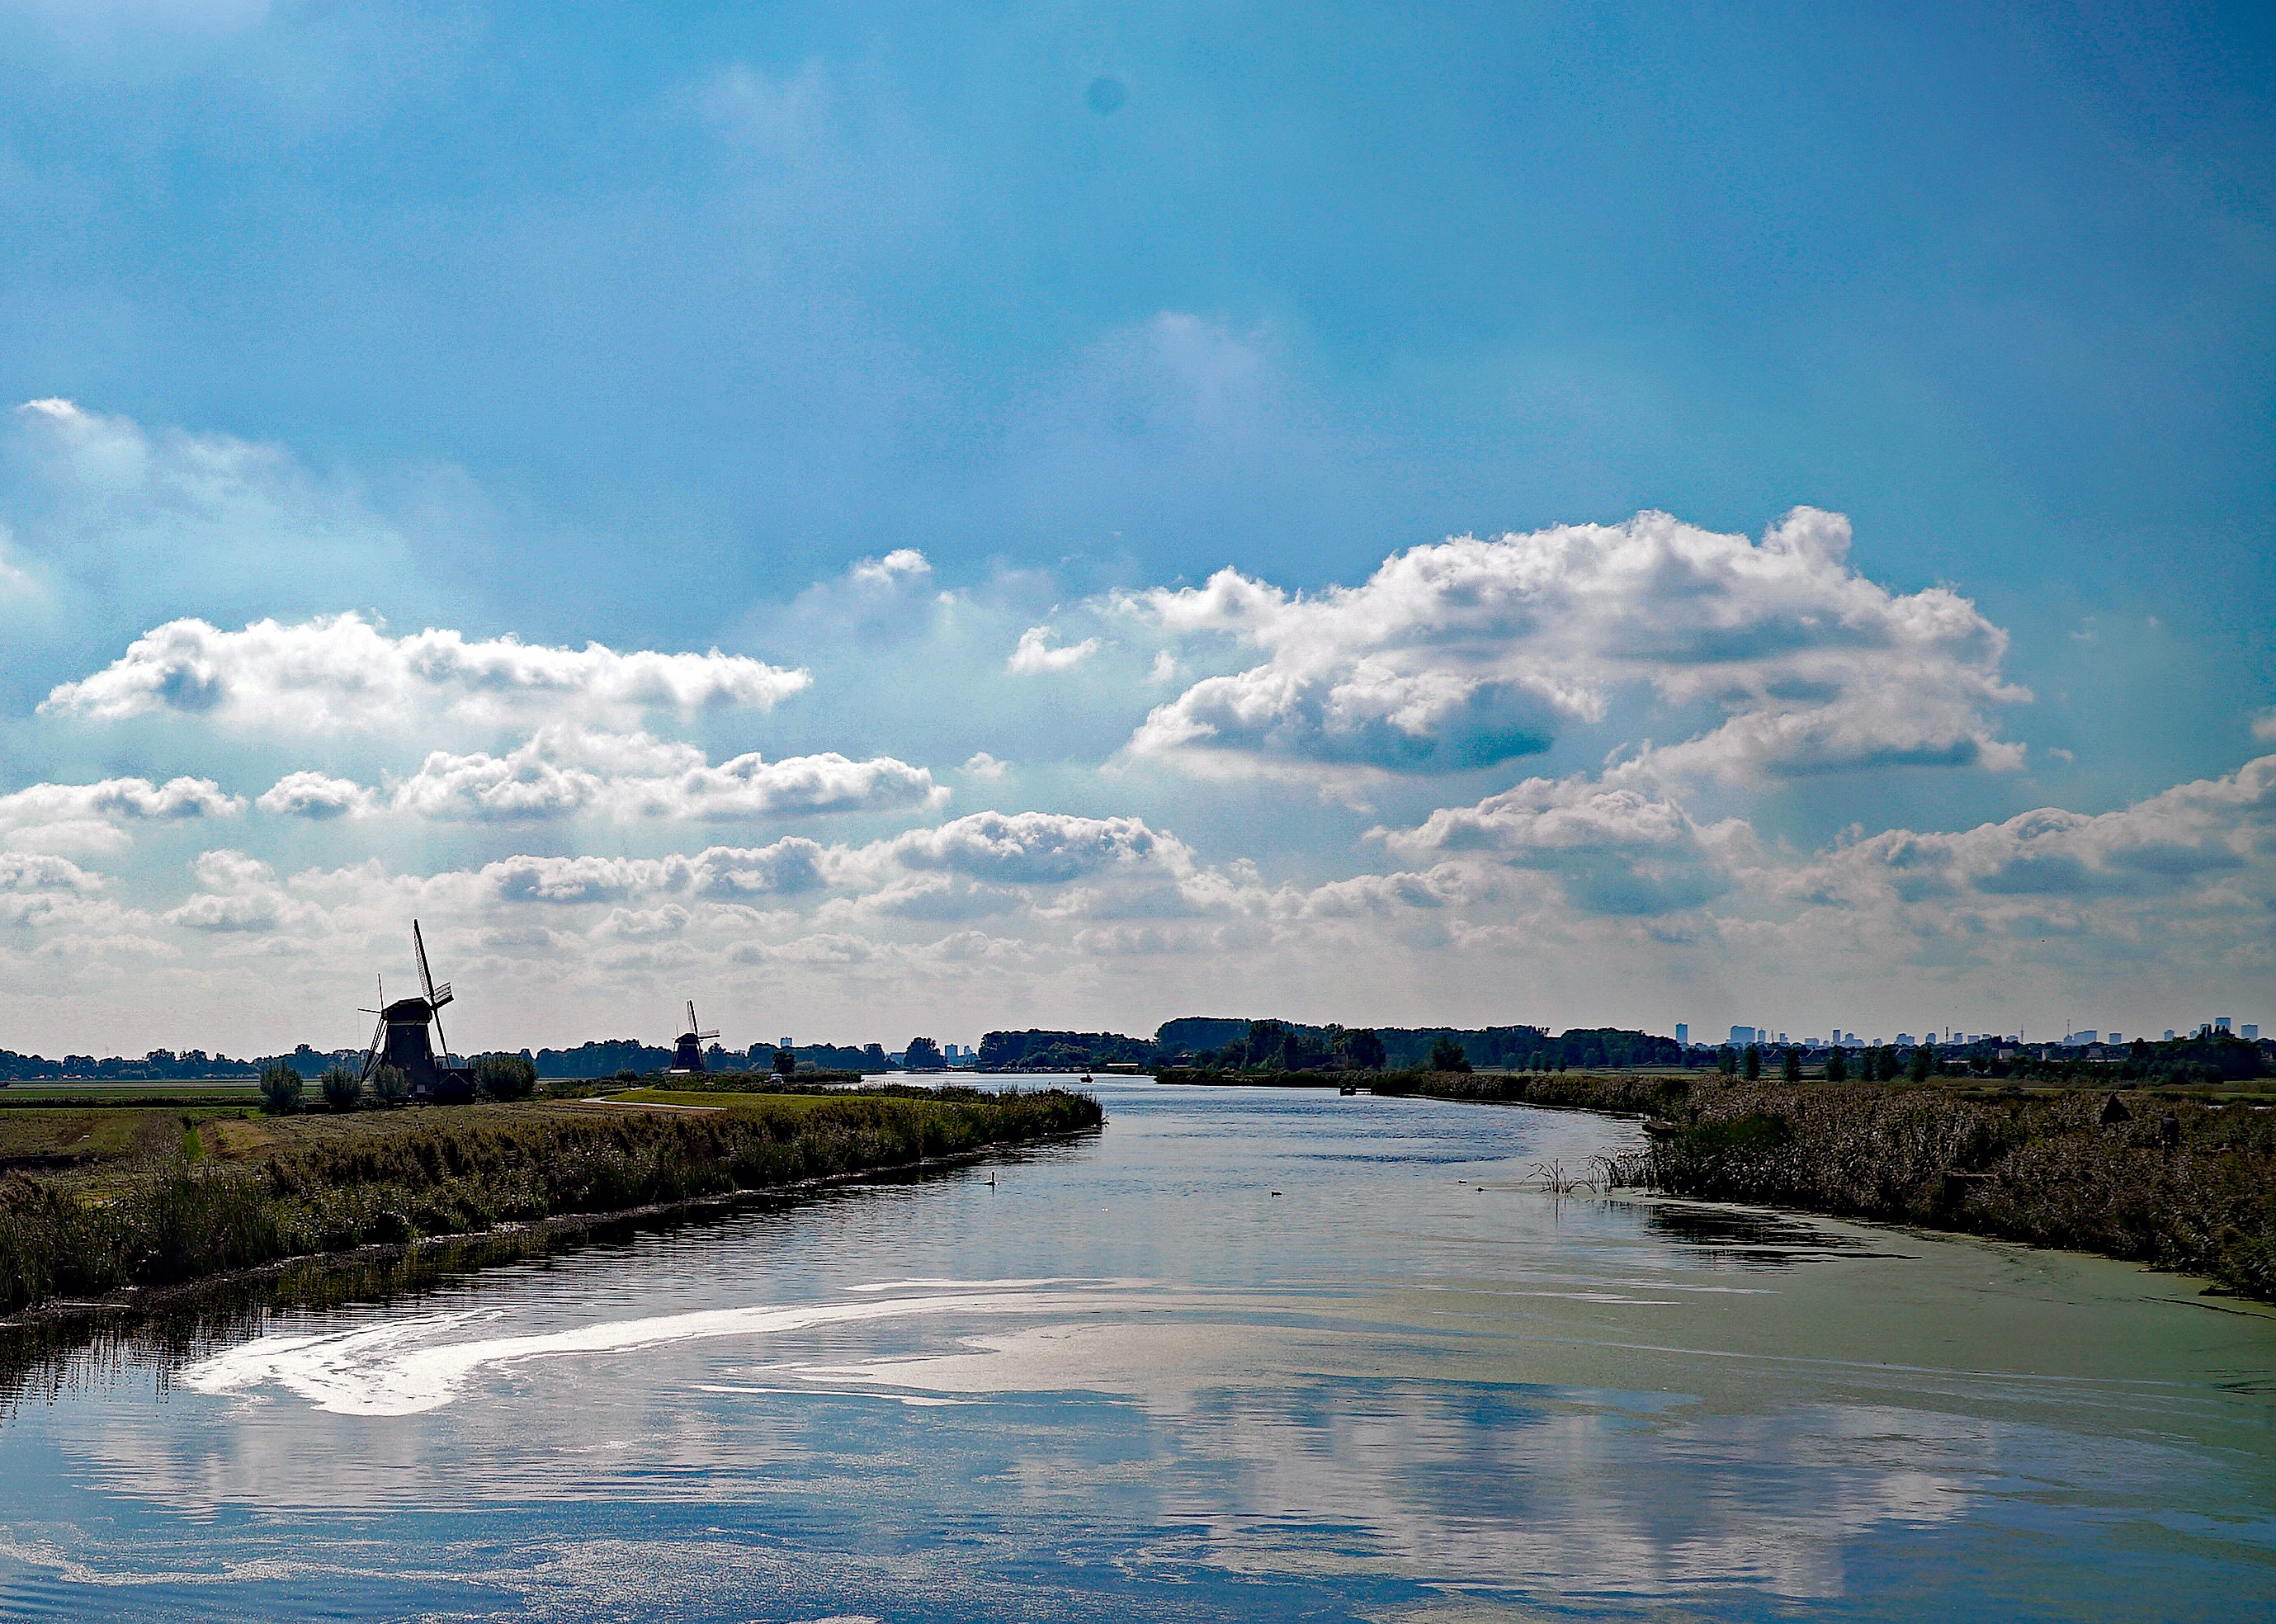 The Rotte River